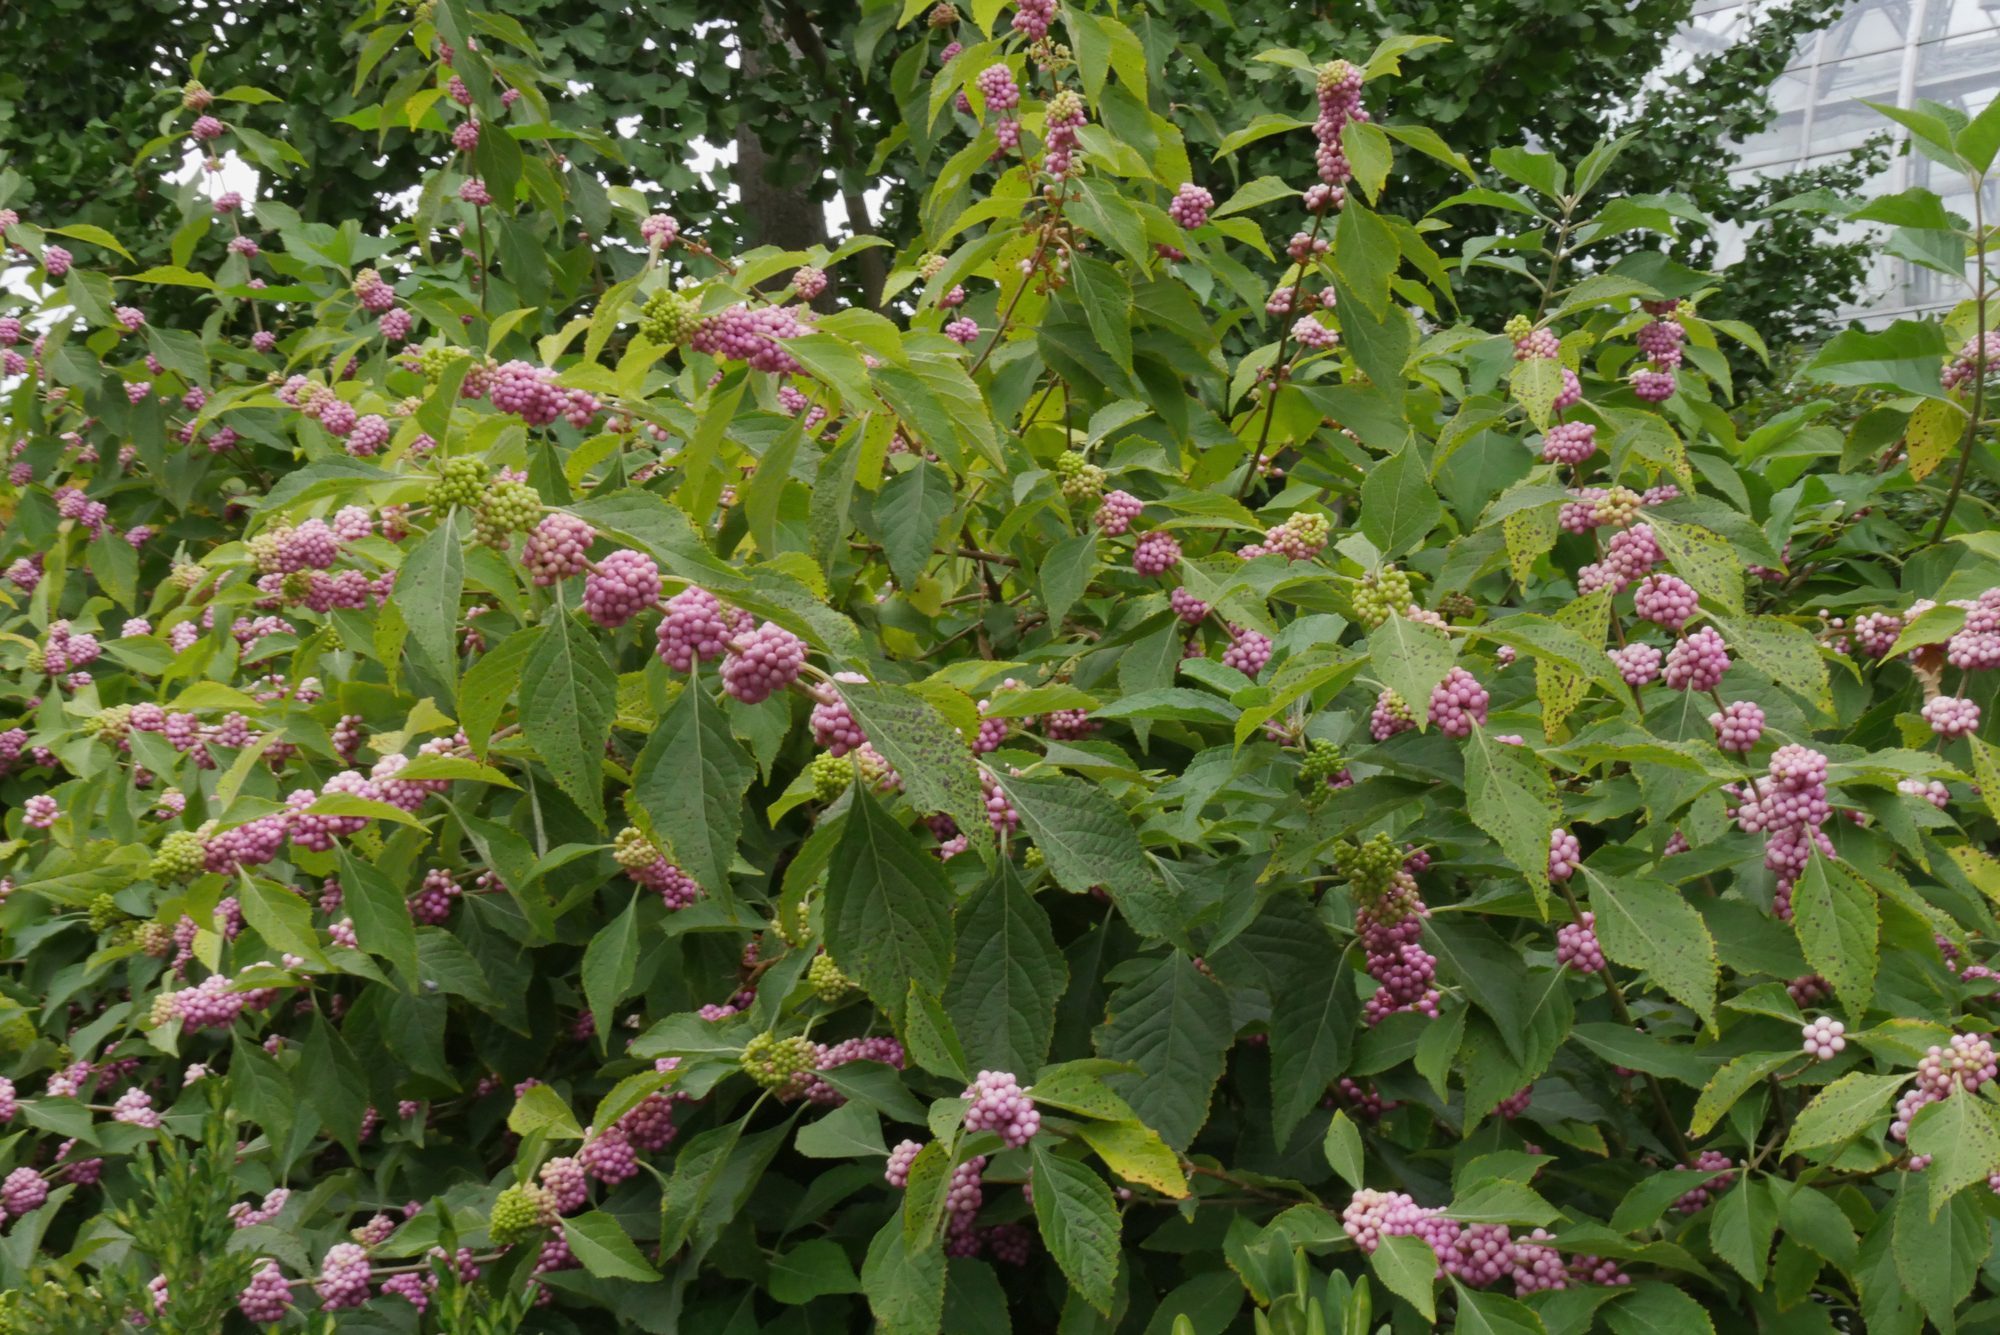 Thick patch of American beautyberry plants, with pink berries sticking out